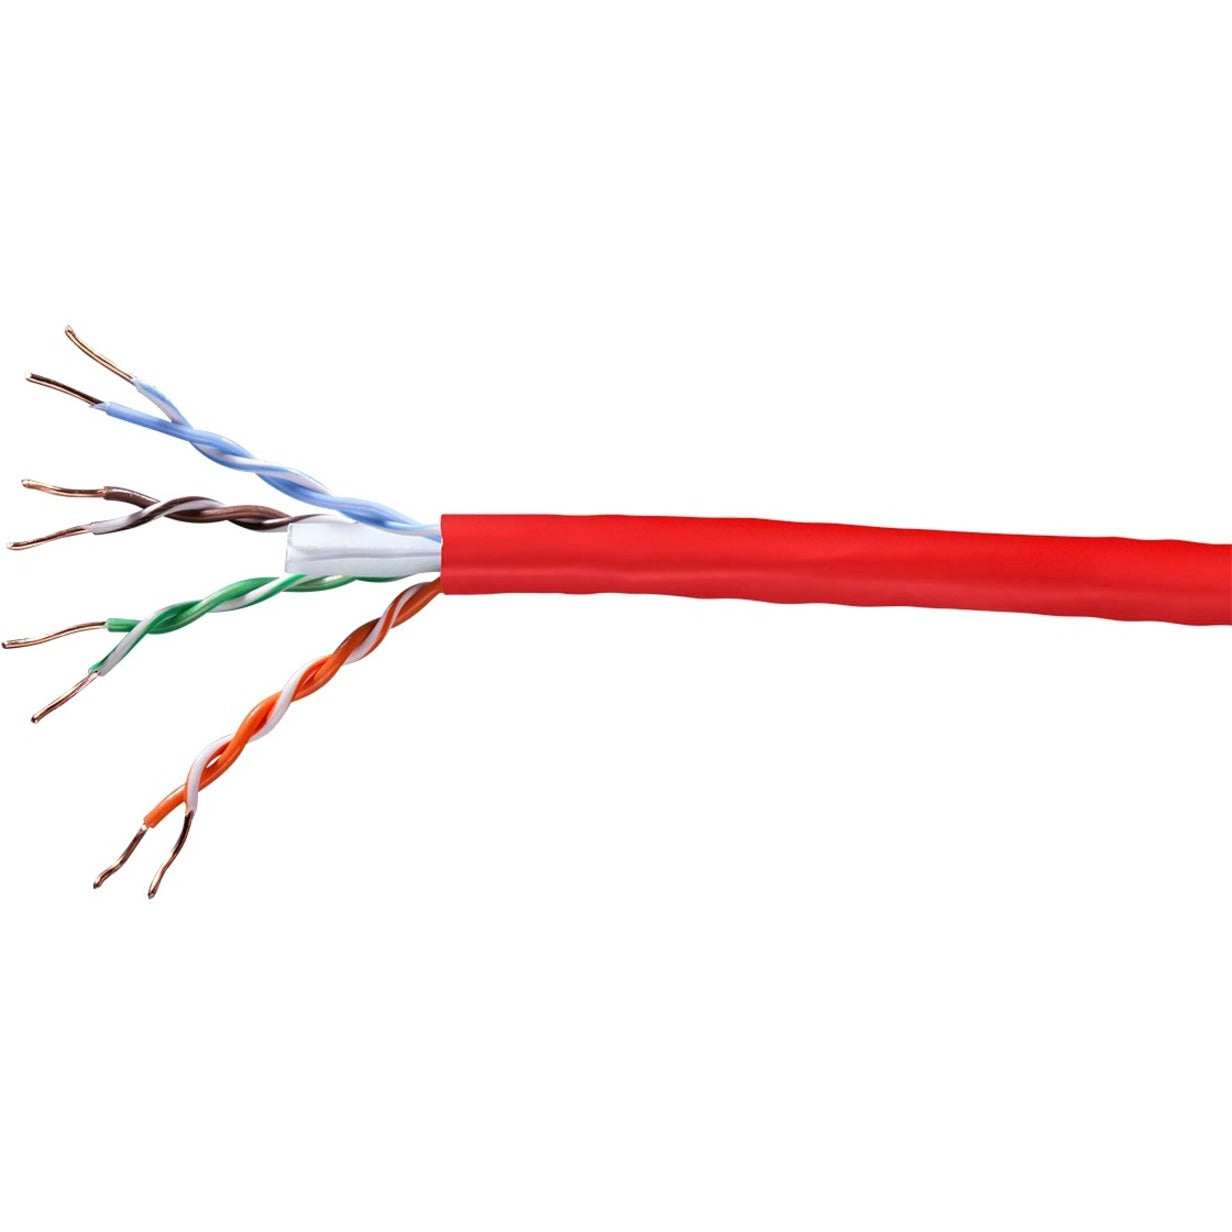 Monoprice 13736 Cat. 6 UTP Network Cable, 1000 ft, Red